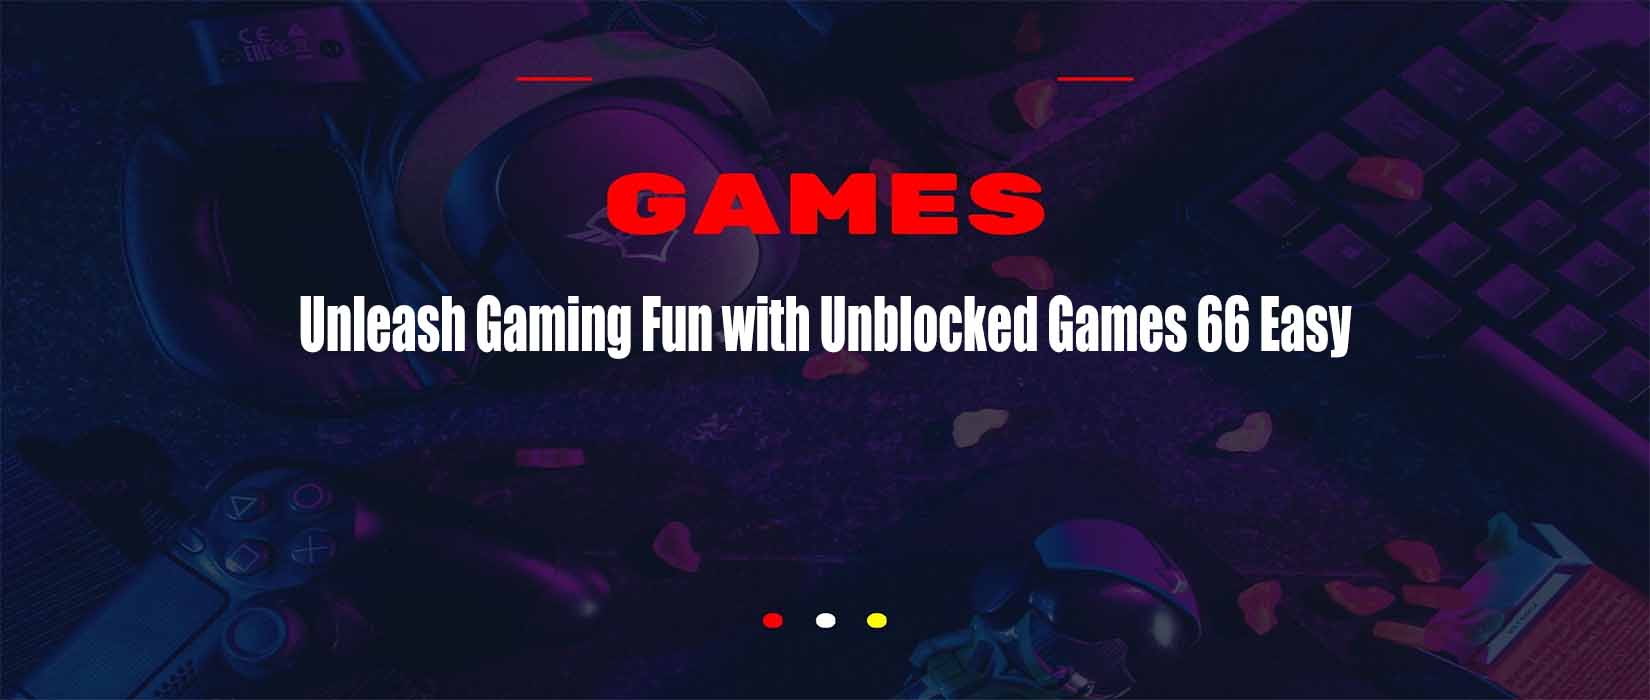 Unleash Gaming Fun with Unblocked Games 66 Easy